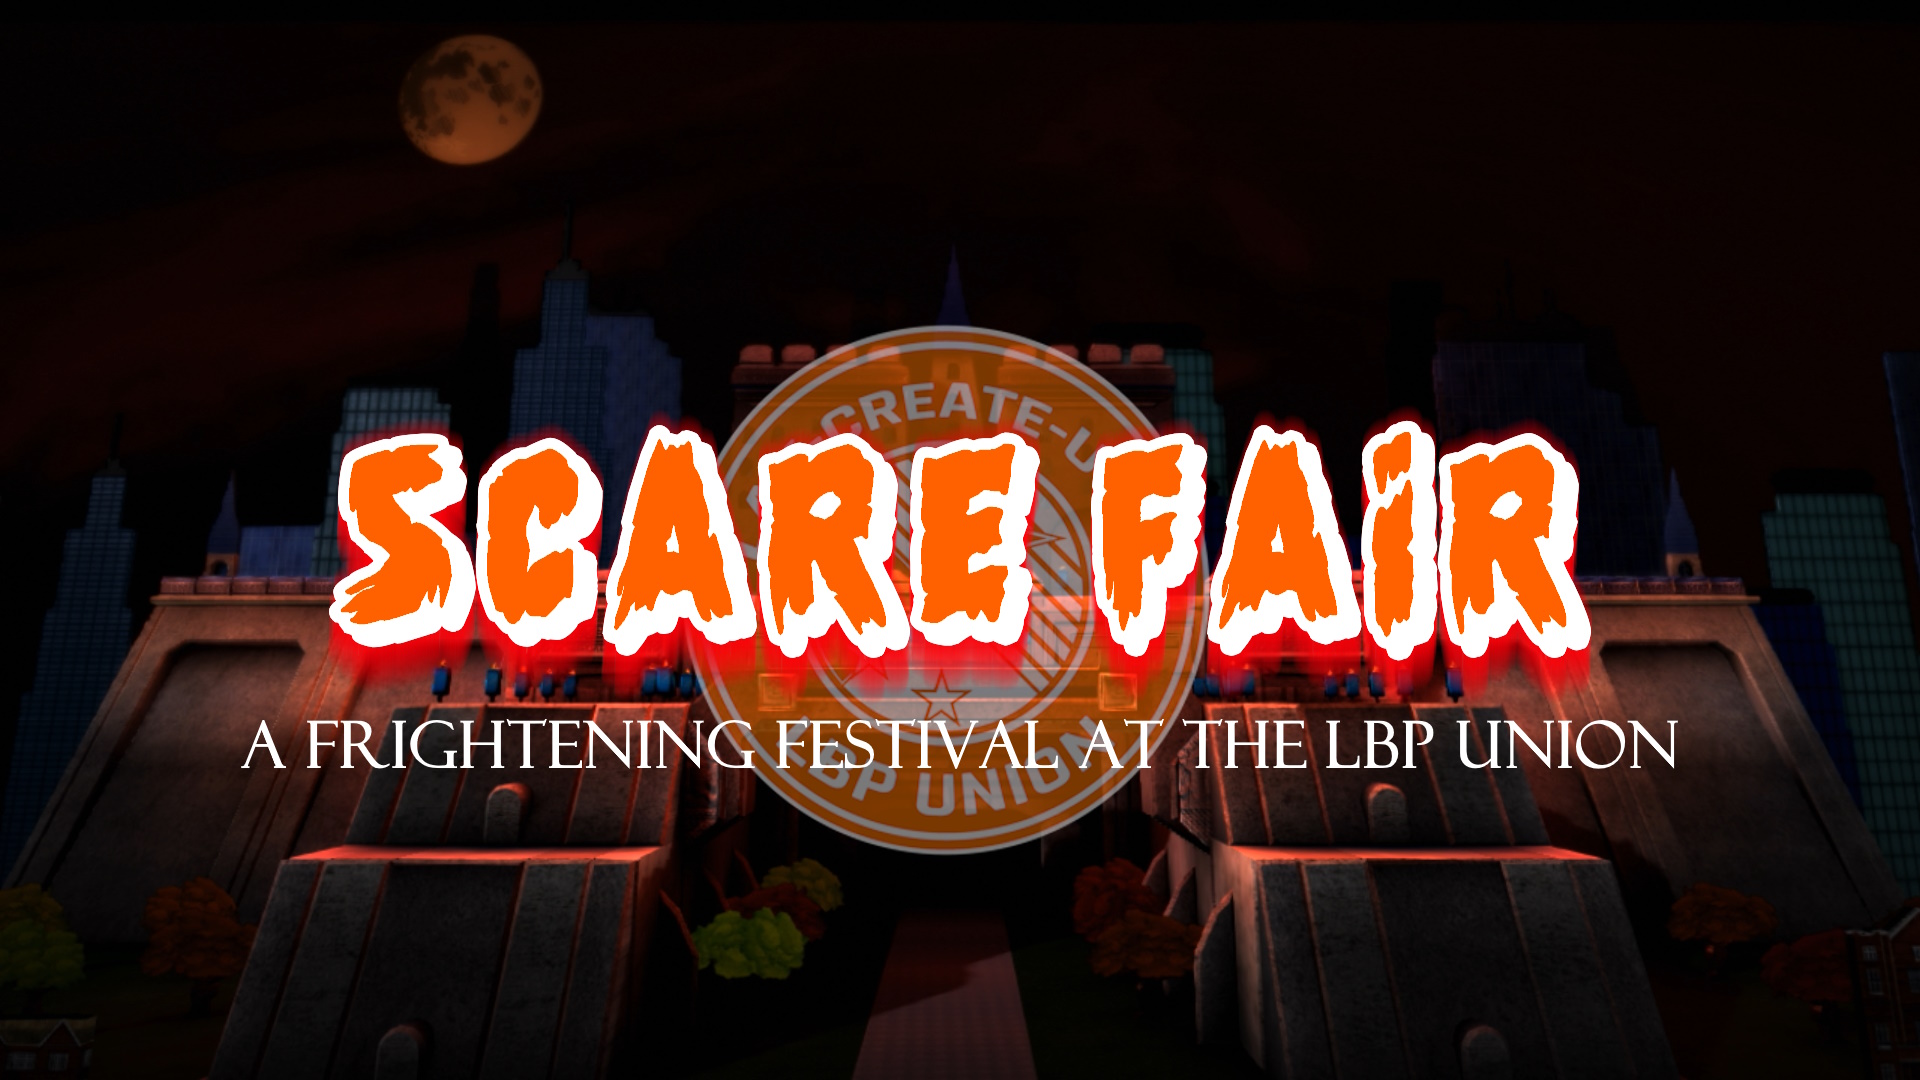 Scare Fair a Frightening Festival at the LBP Union